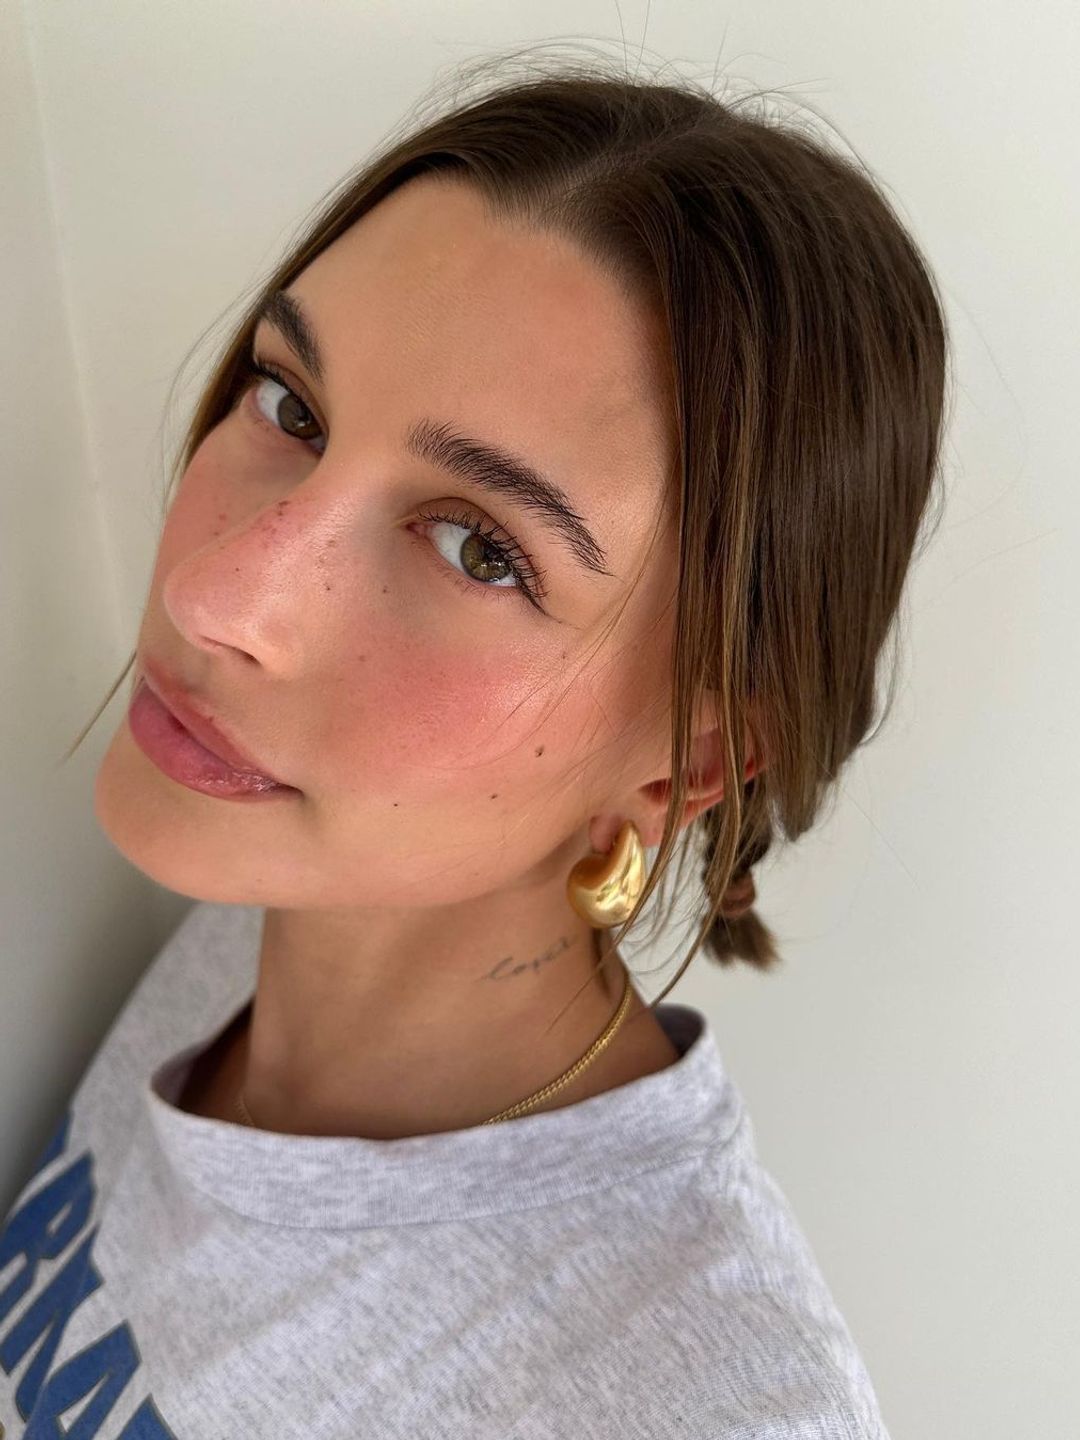 Hailey Bieber wears minimal makeup and fake freckles